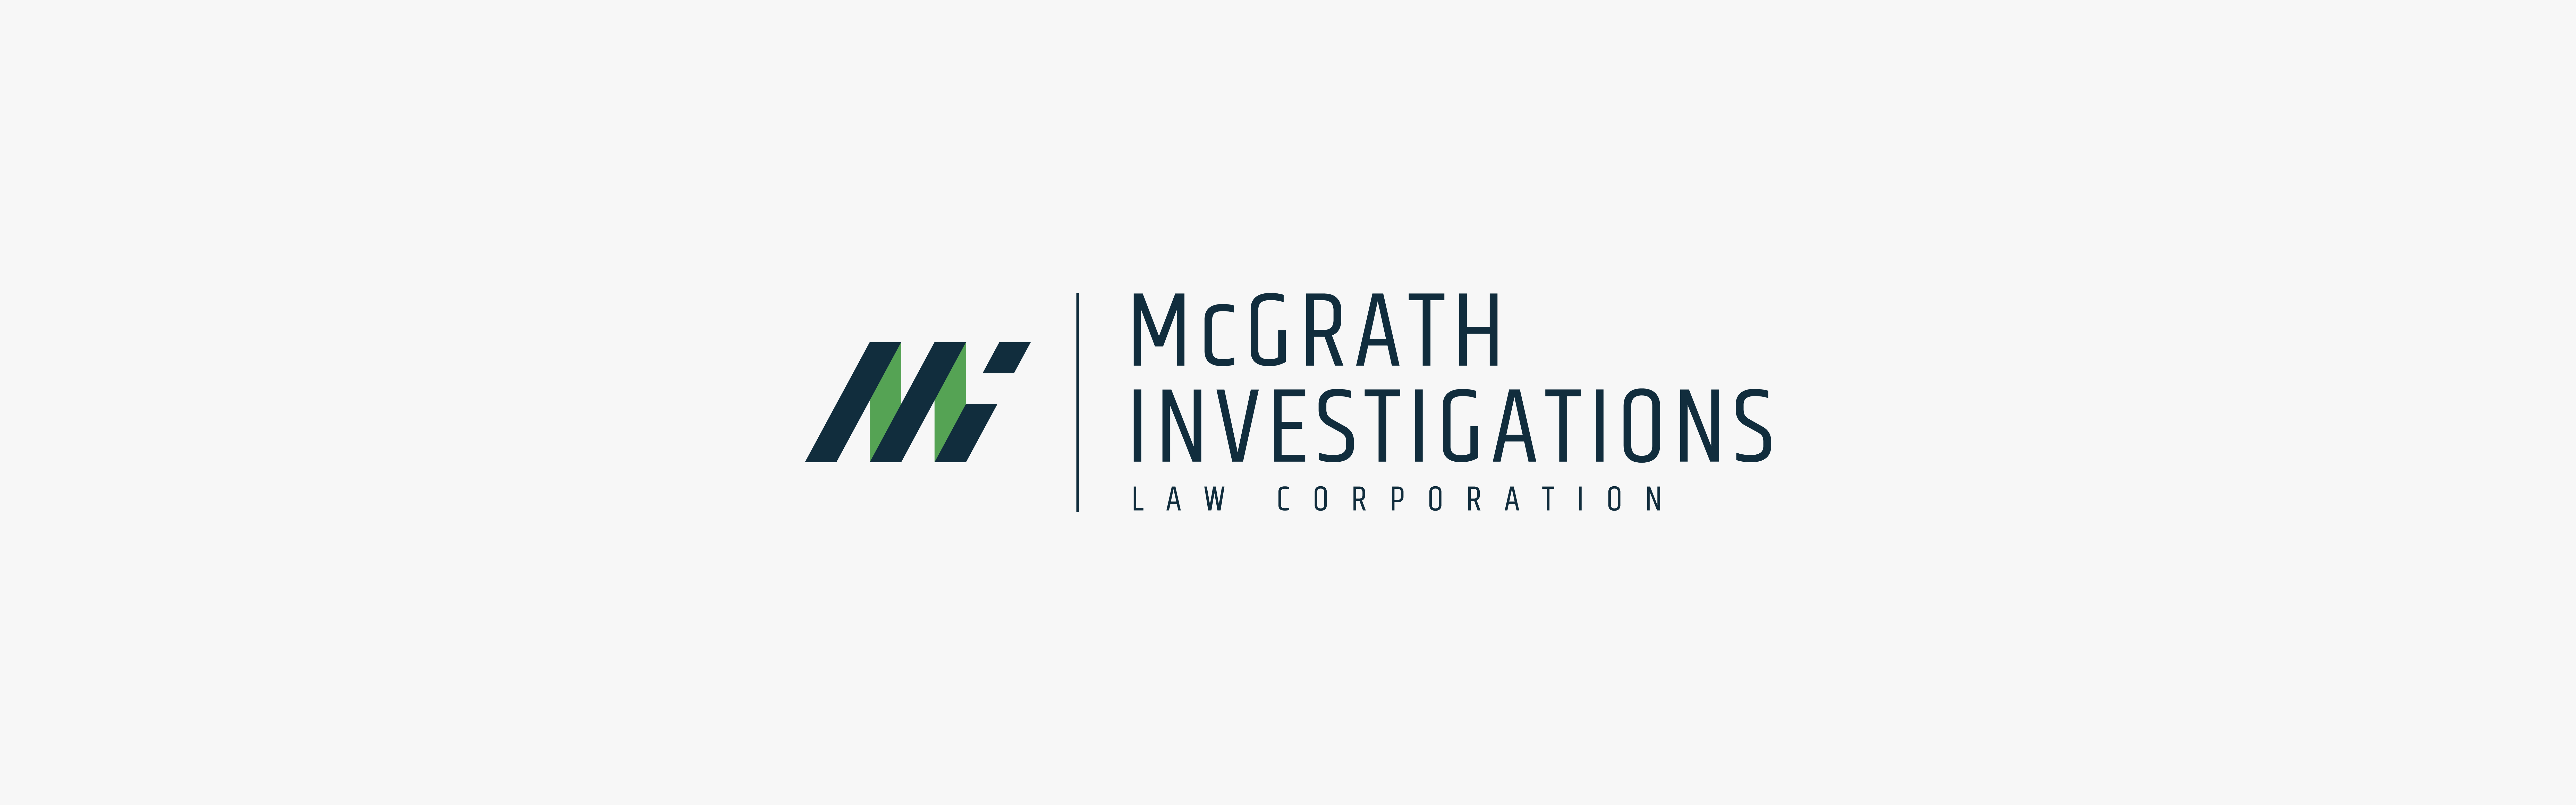 Logo design for McGrath Investigations, a law corporation, featuring a stylized 'M' with green accents.